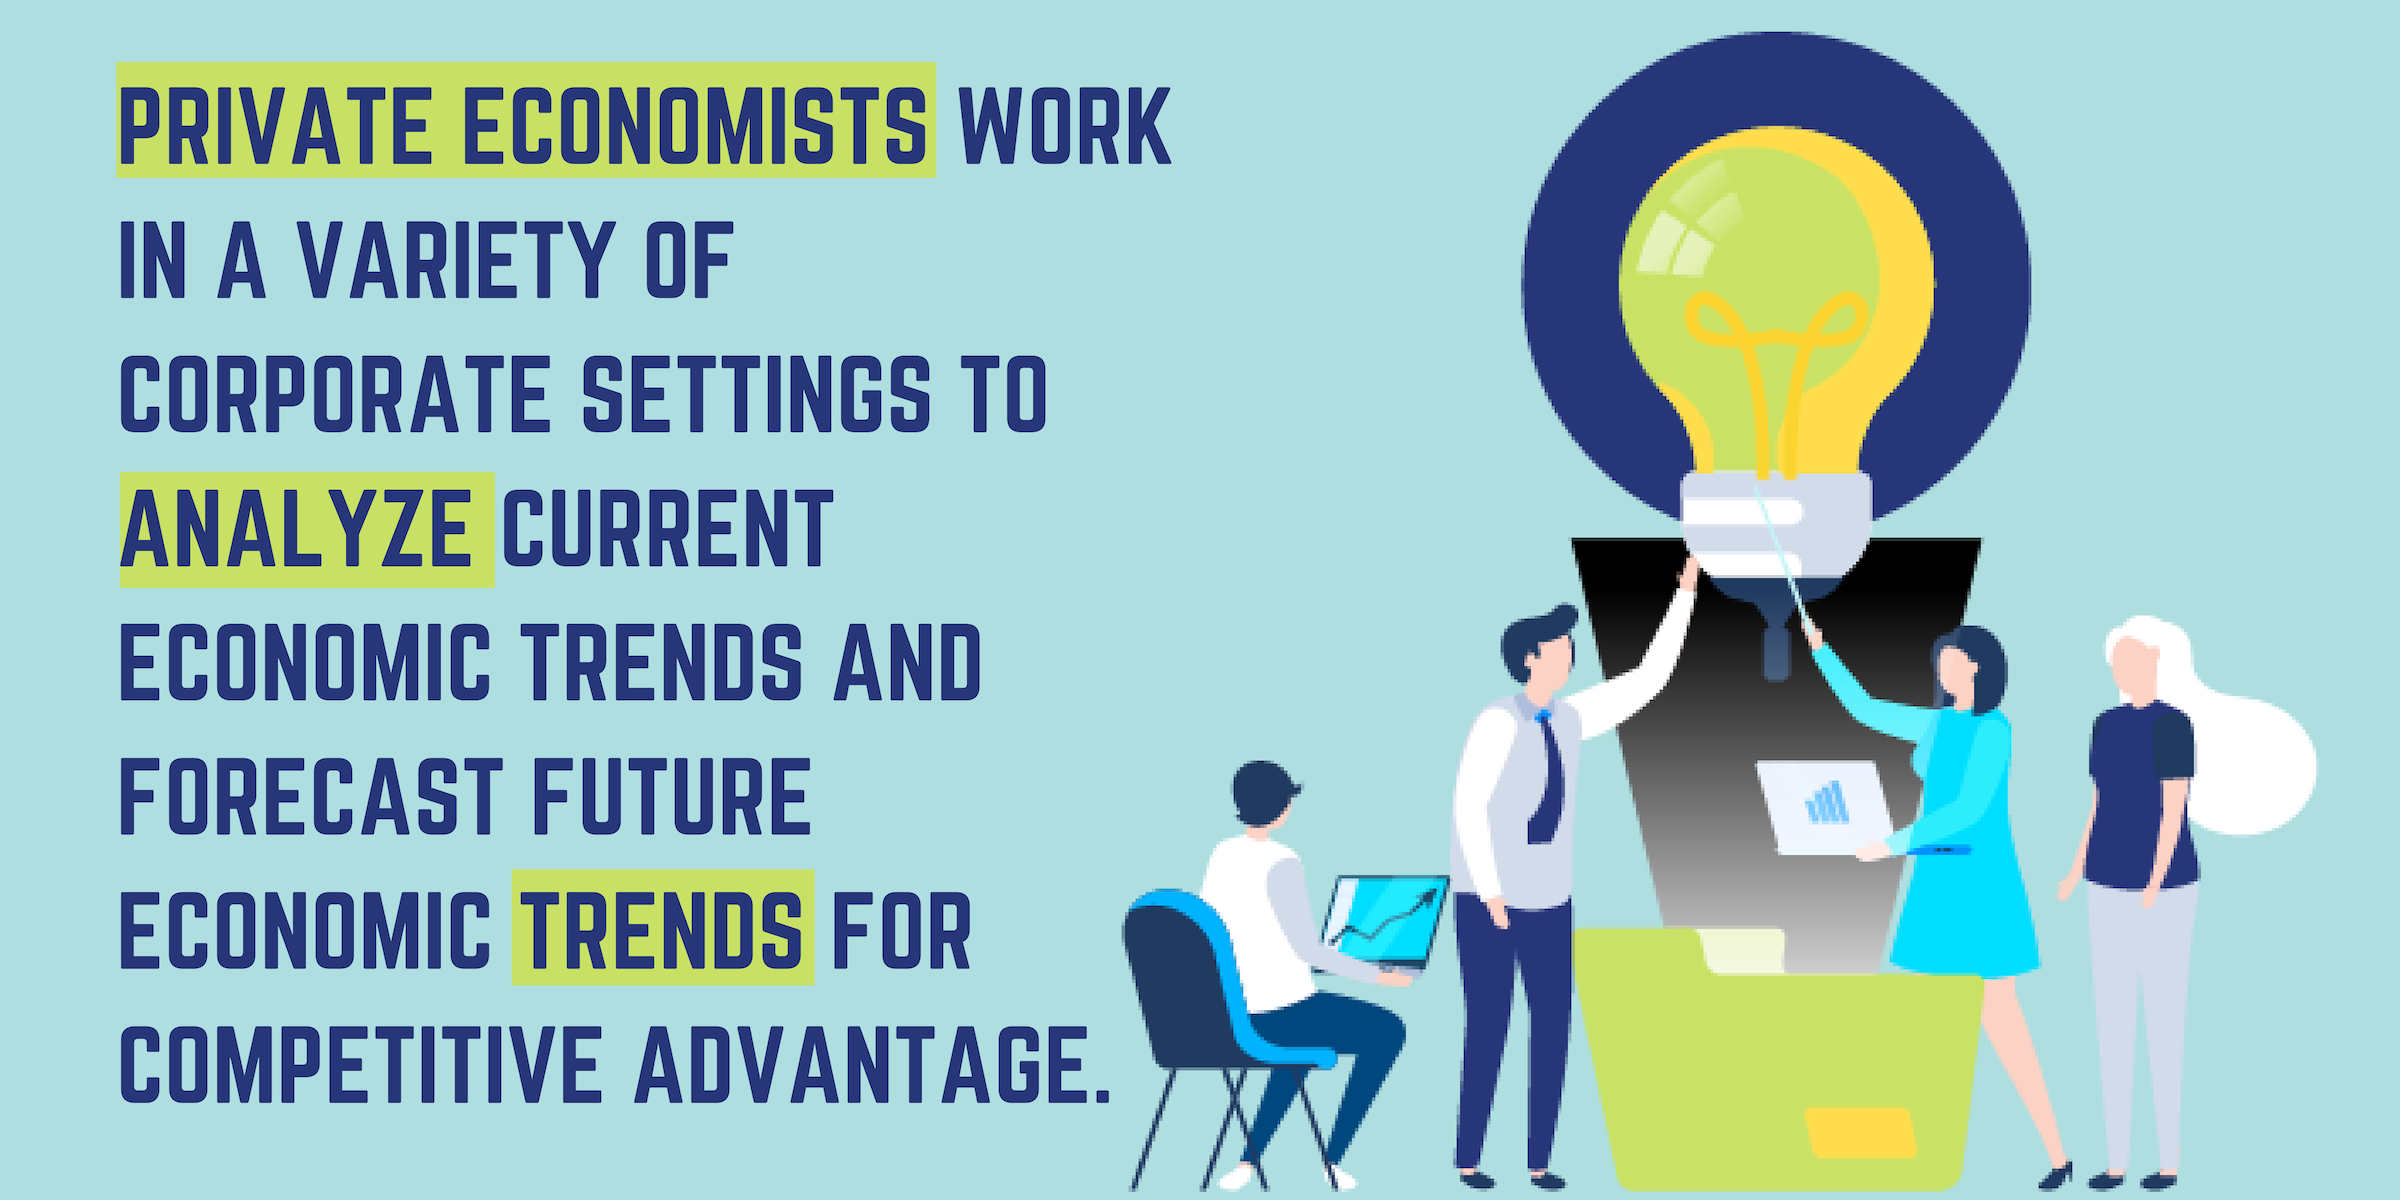 Private economists work in a variety of corporate settings to analyze current economic trends and forecast future economic trends for competitive advantage.